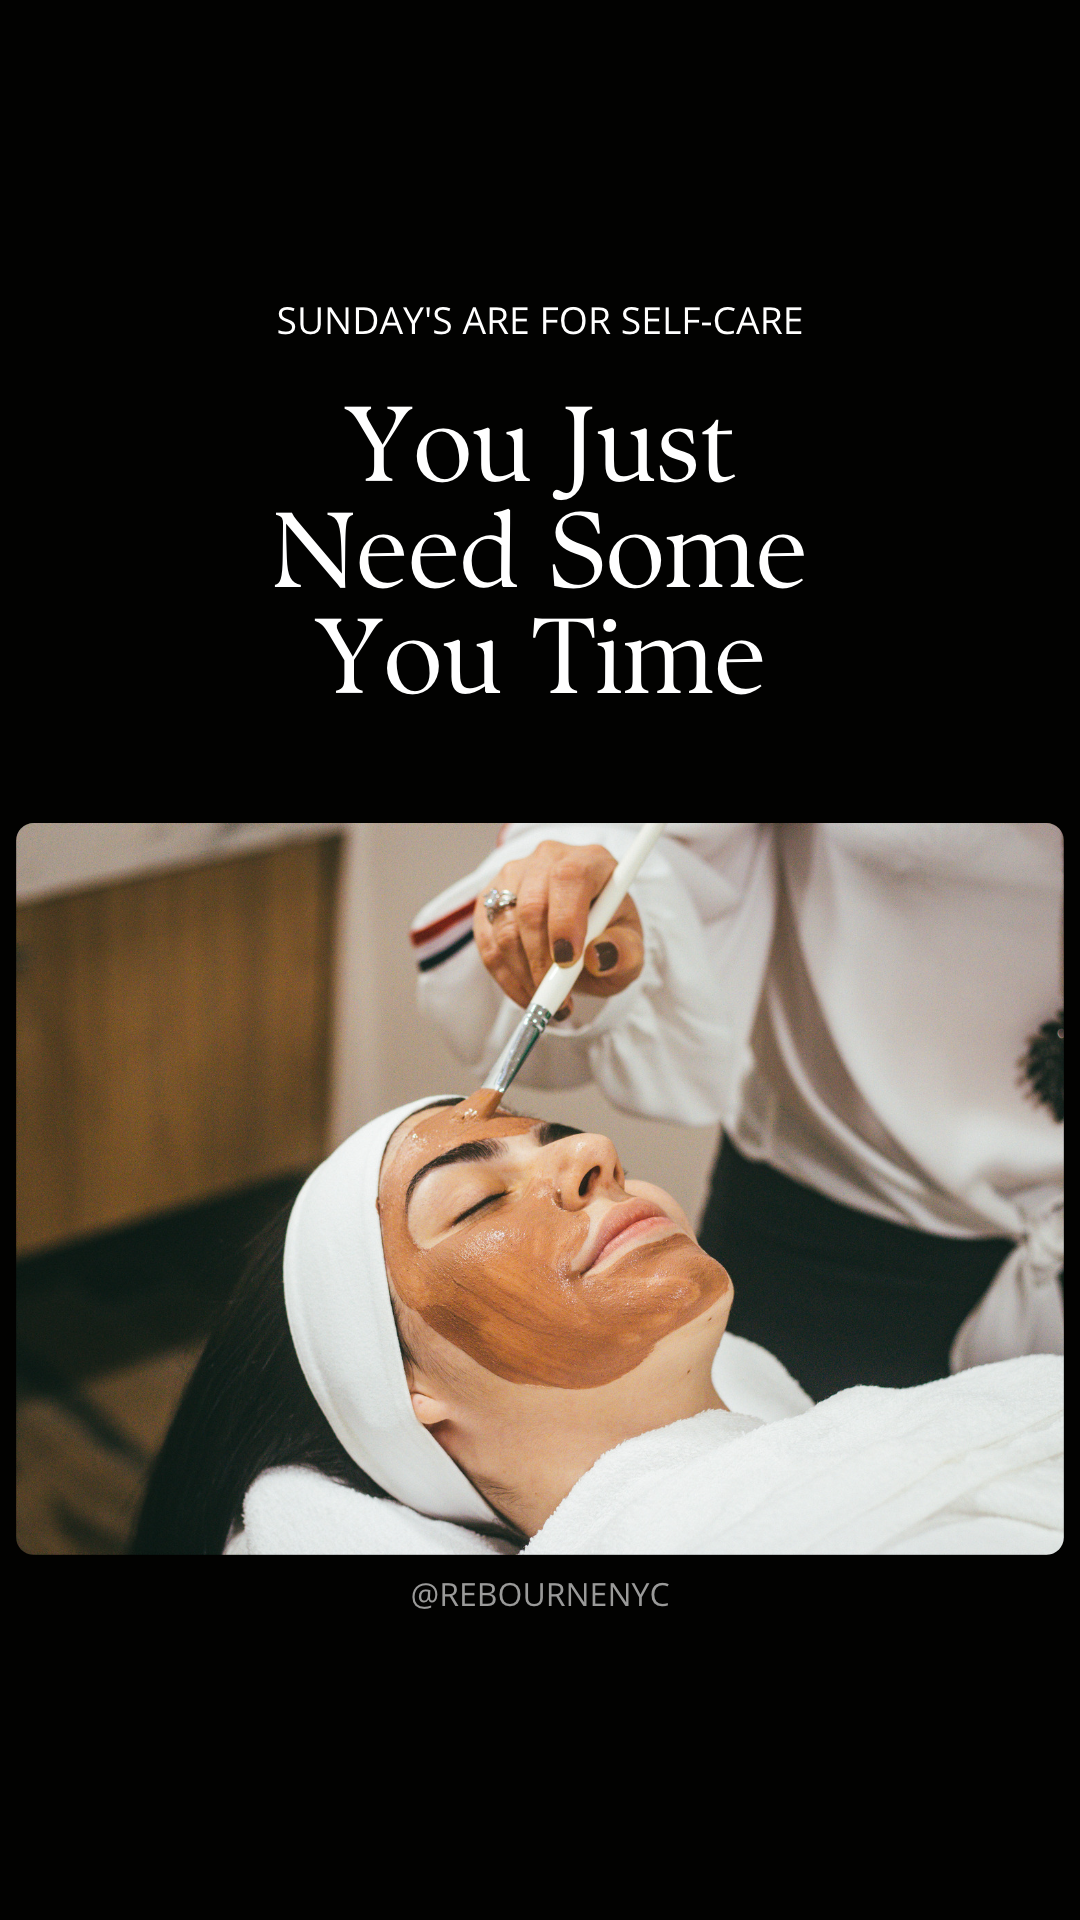 SELF-CARE SUNDAY: You Just Need Some You Time